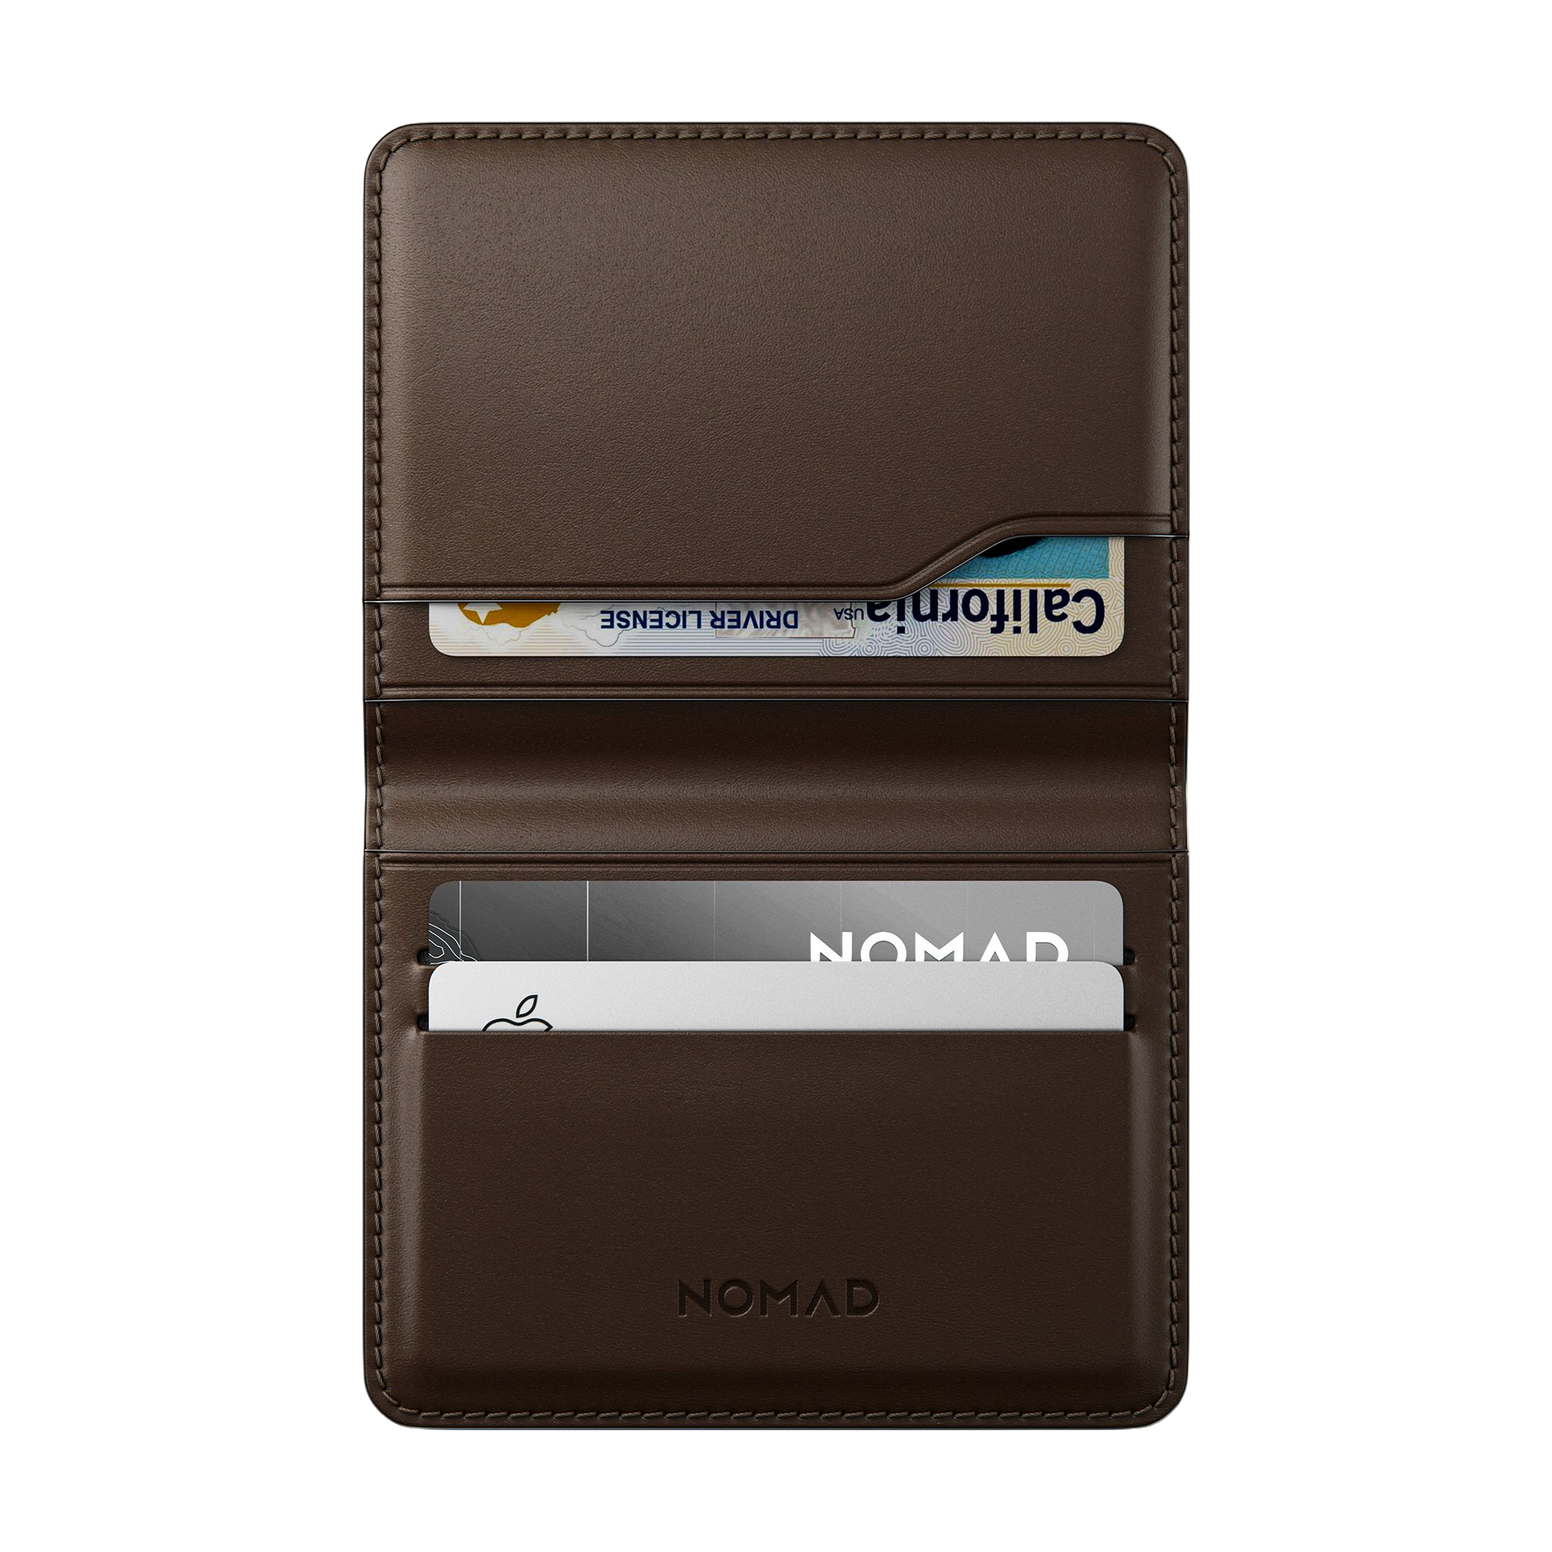 Nomad Card for AirTag wallet tracking is credit-card size and